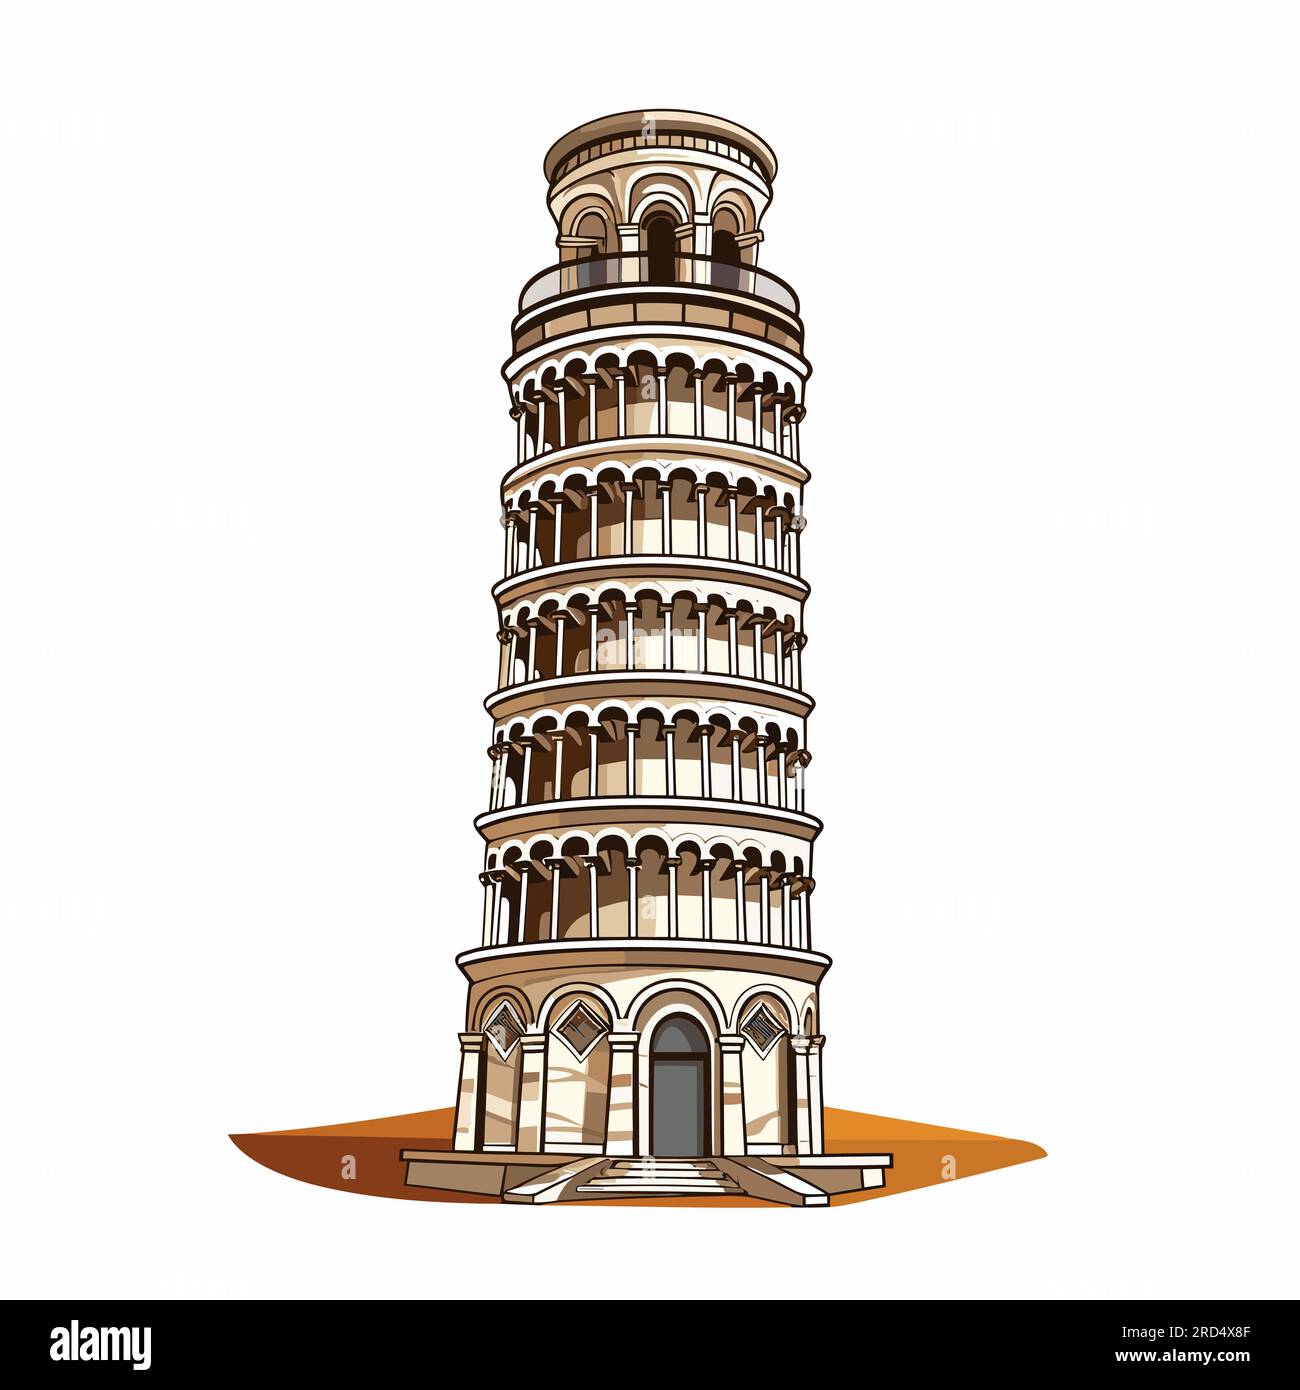 Leaning Tower Pisa Illustration Stock Illustrations – 2,473 Leaning Tower  Pisa Illustration Stock Illustrations, Vectors & Clipart - Dreamstime